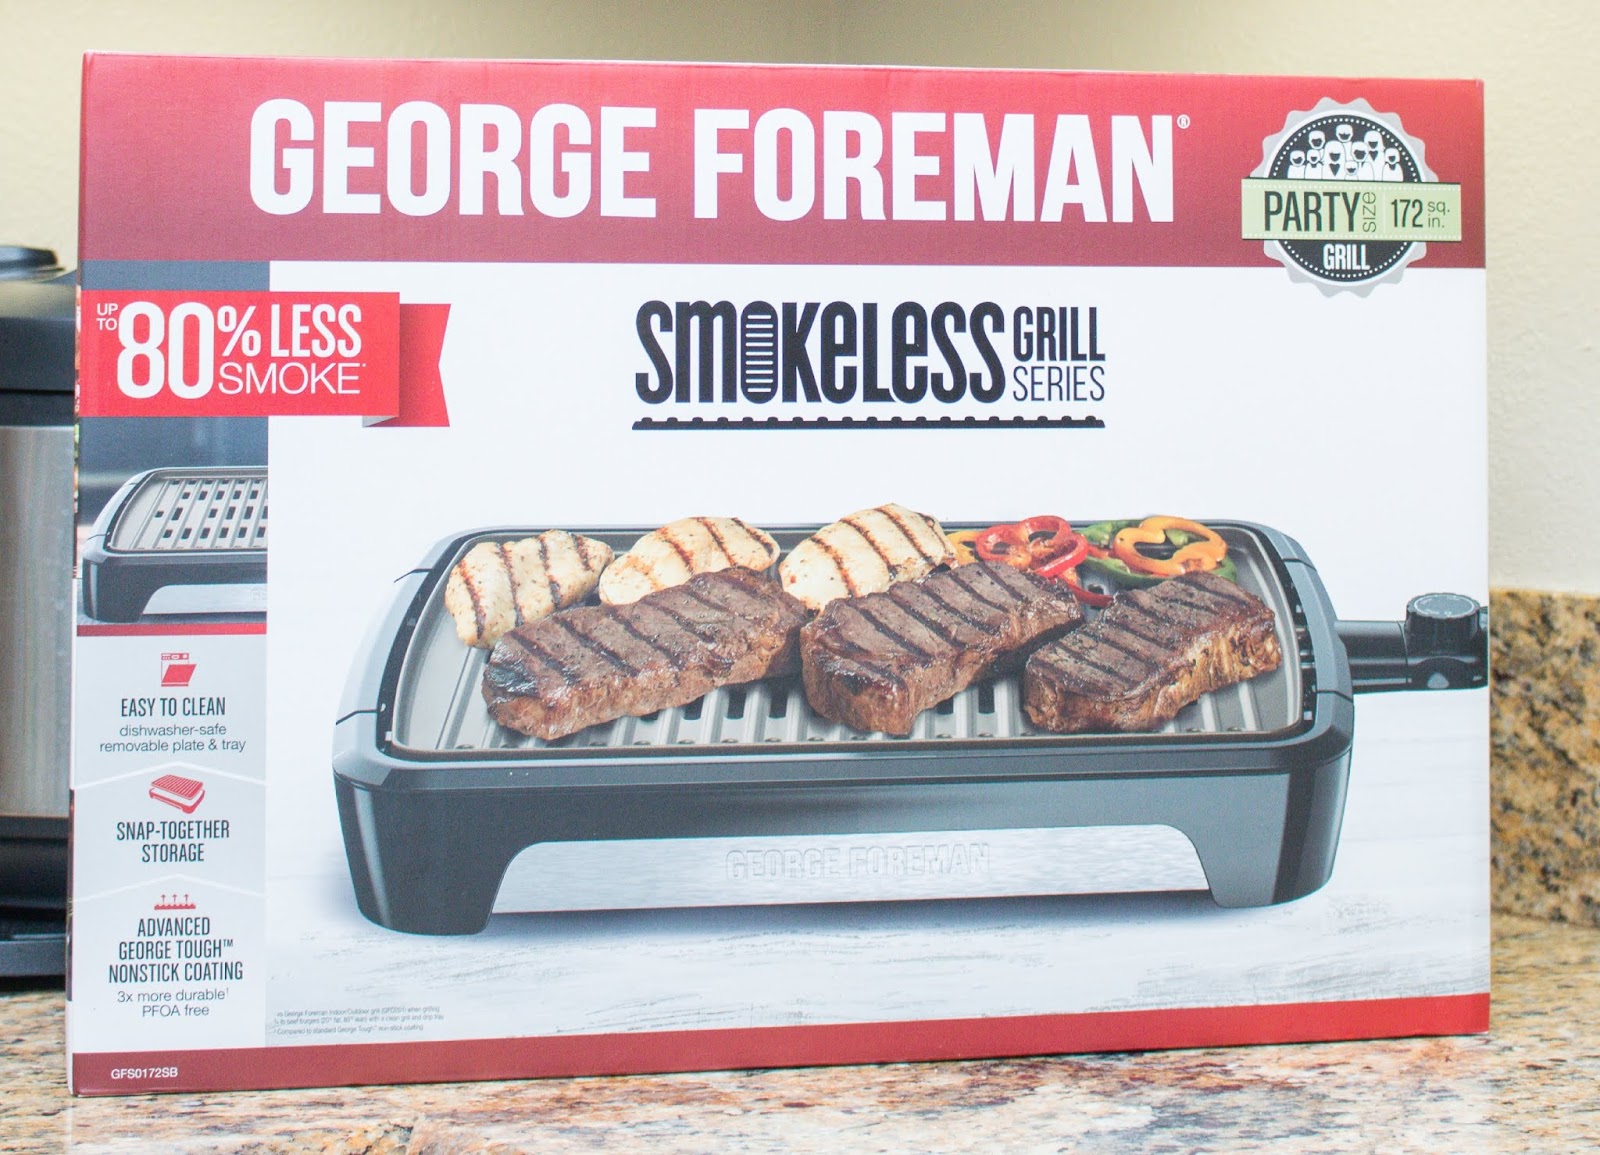 An Indoor Grill Without the Smoke - Food & Nutrition Magazine